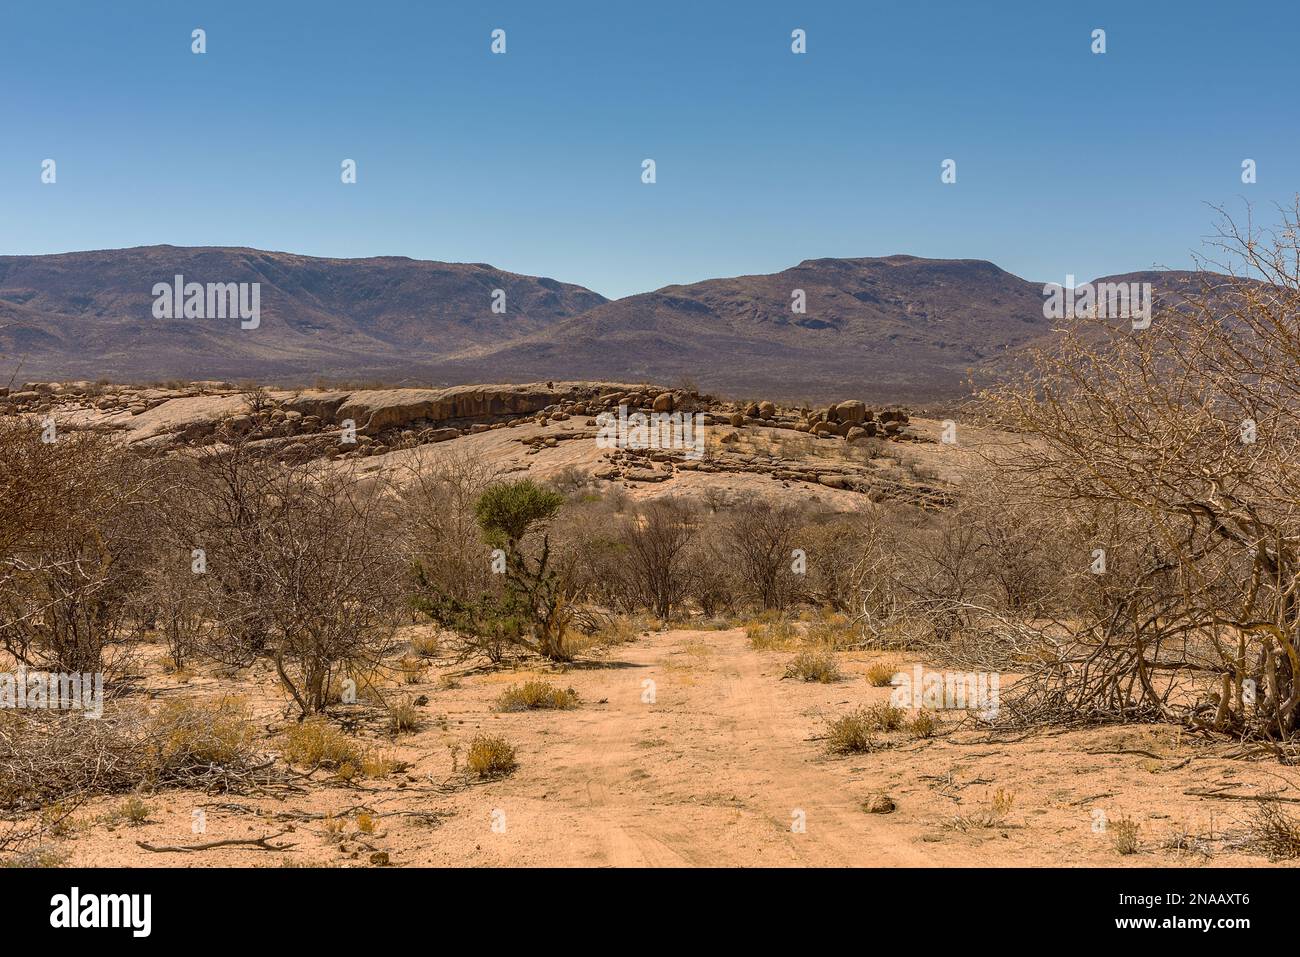 The landscape of the Erongo Mountains in Namibia Stock Photo